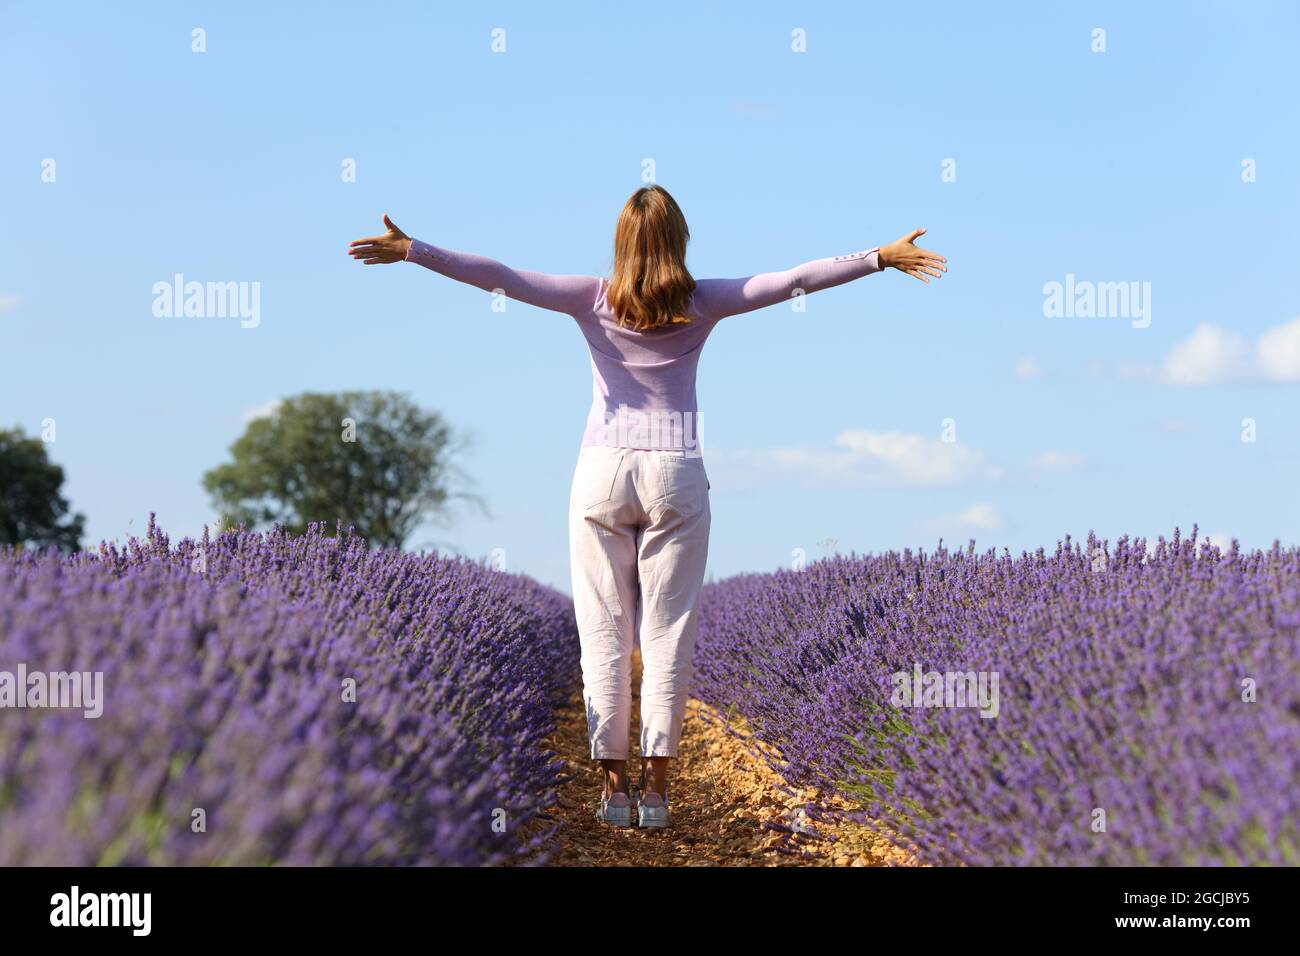 Back view portrait of a casual woman outstretching arms celebrating in lavender field Stock Photo